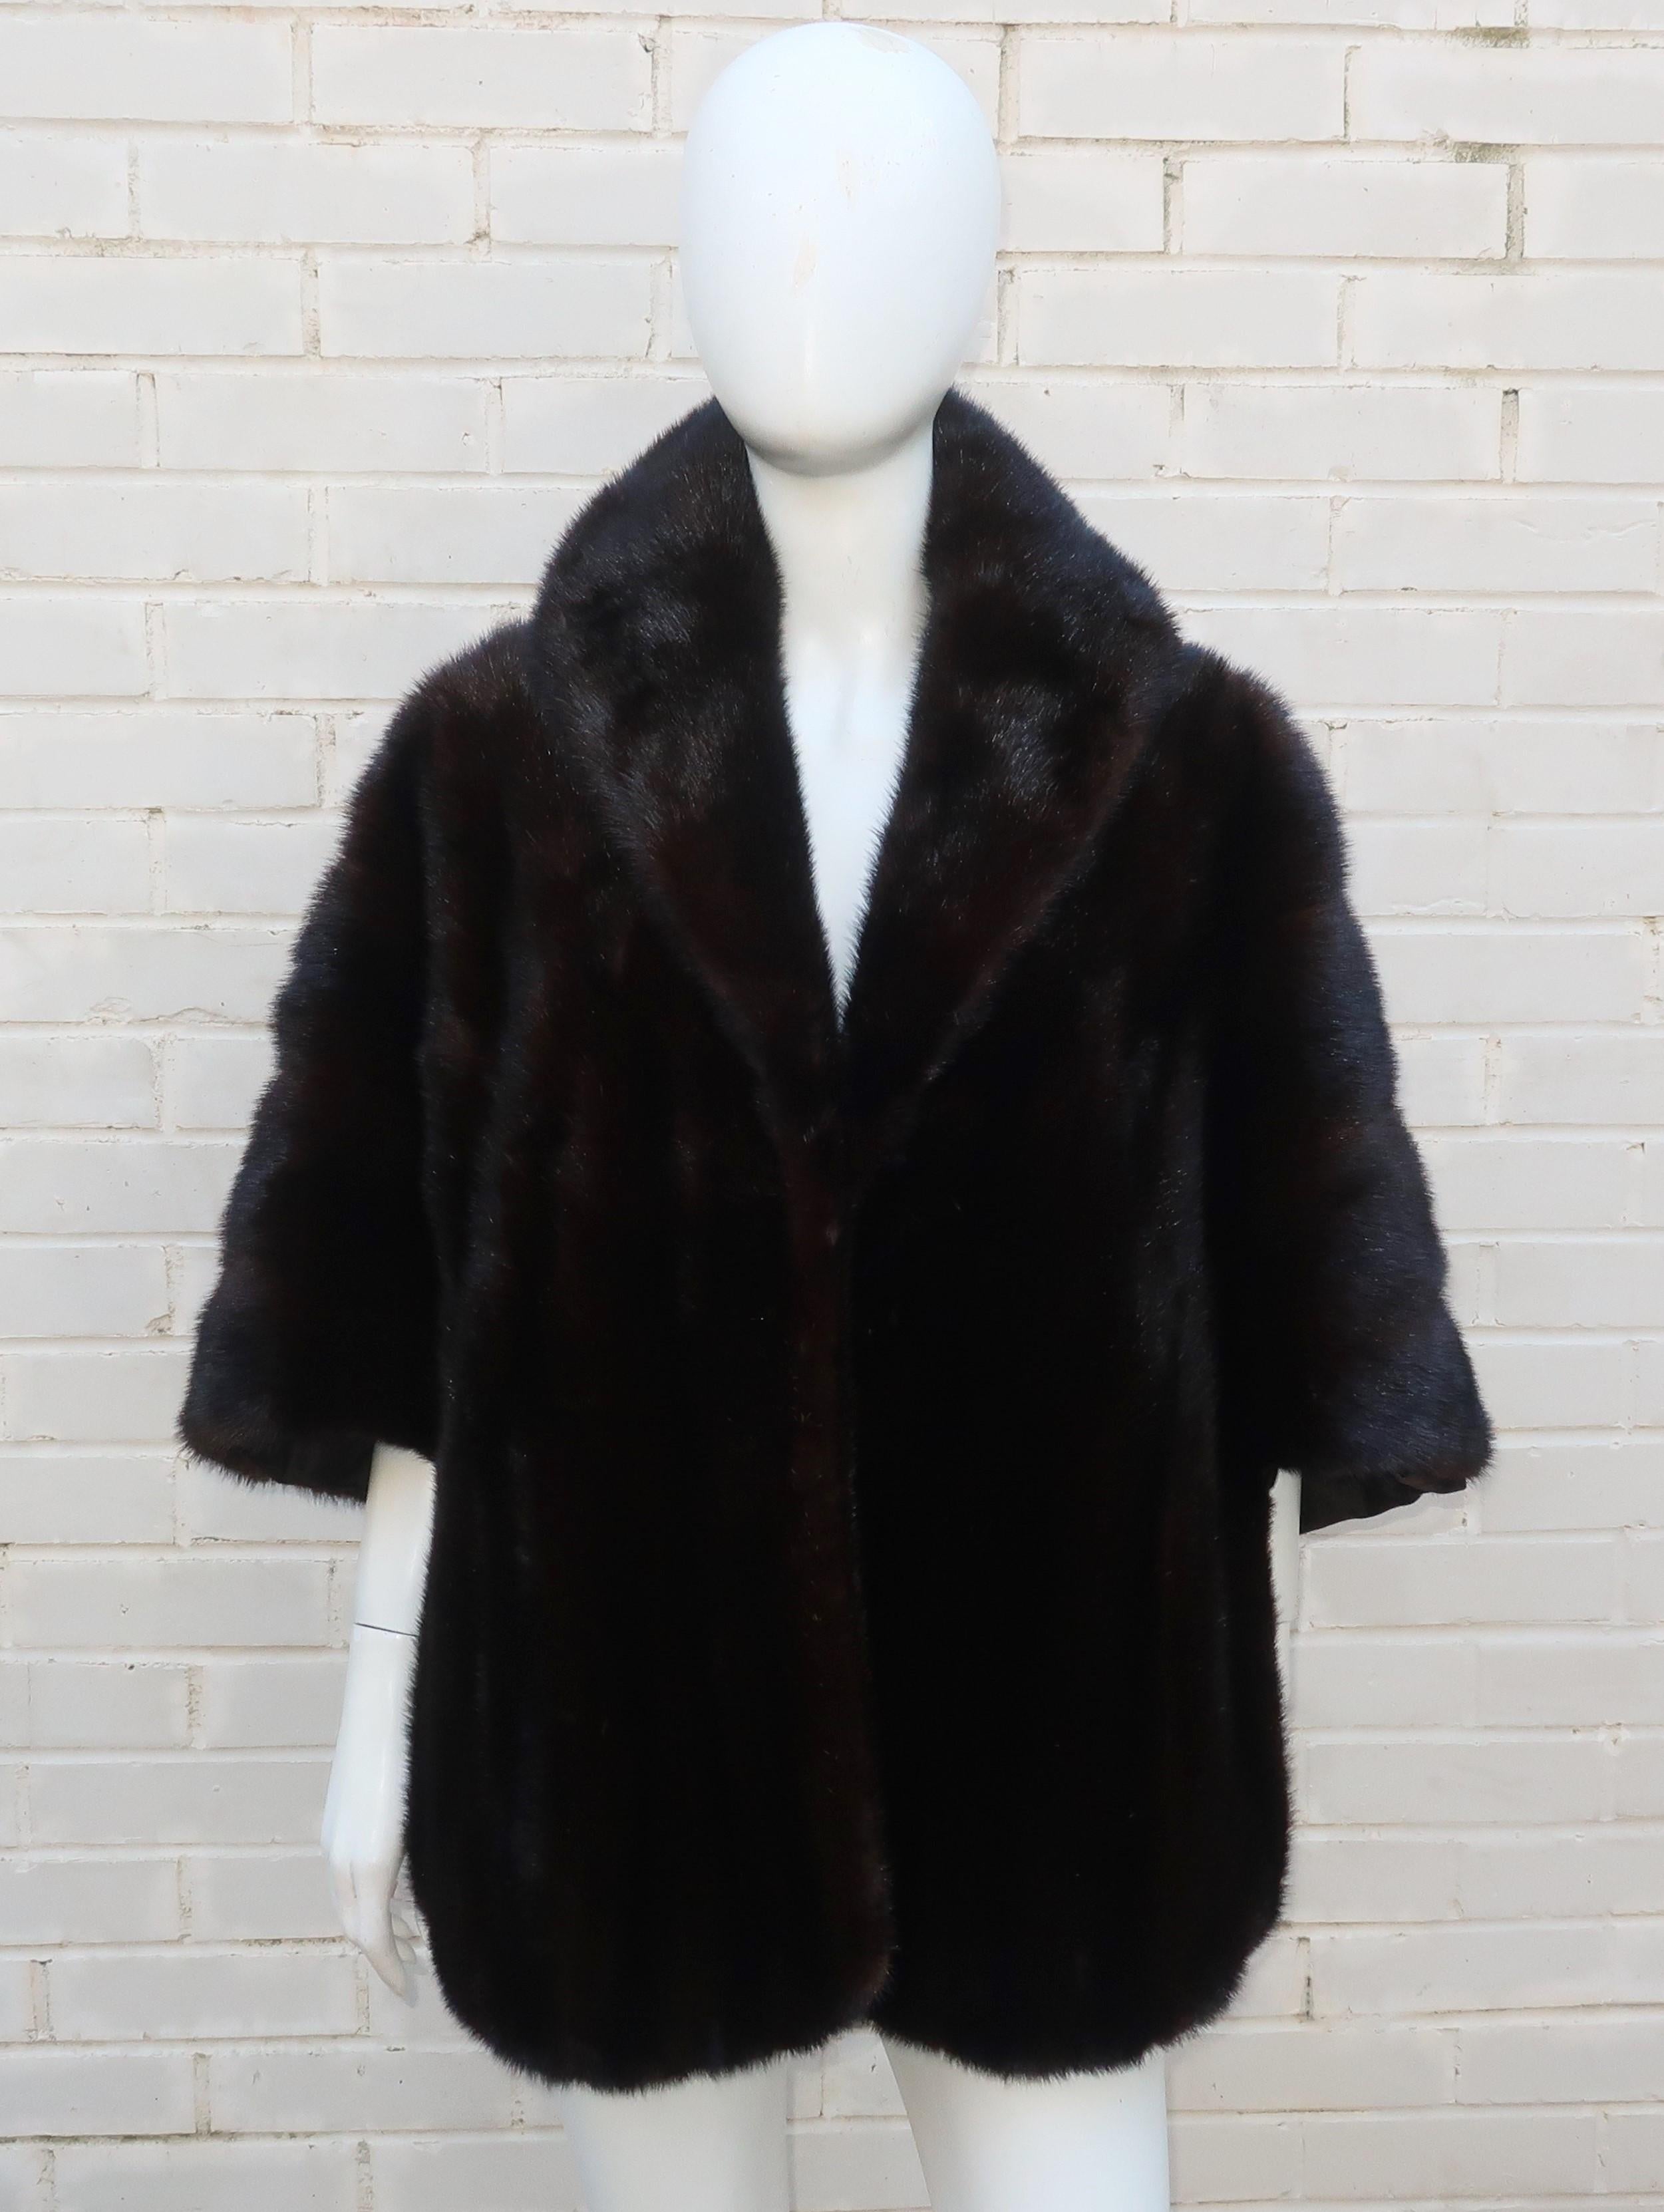 1950's dark brown (near black) mink stole wrap from famed Chicago department store, Marshall Field.  Beautifully made with collar, long front panels, hidden pockets and a long back resembling a cape.  It is lined in dark brown silk taffeta with a